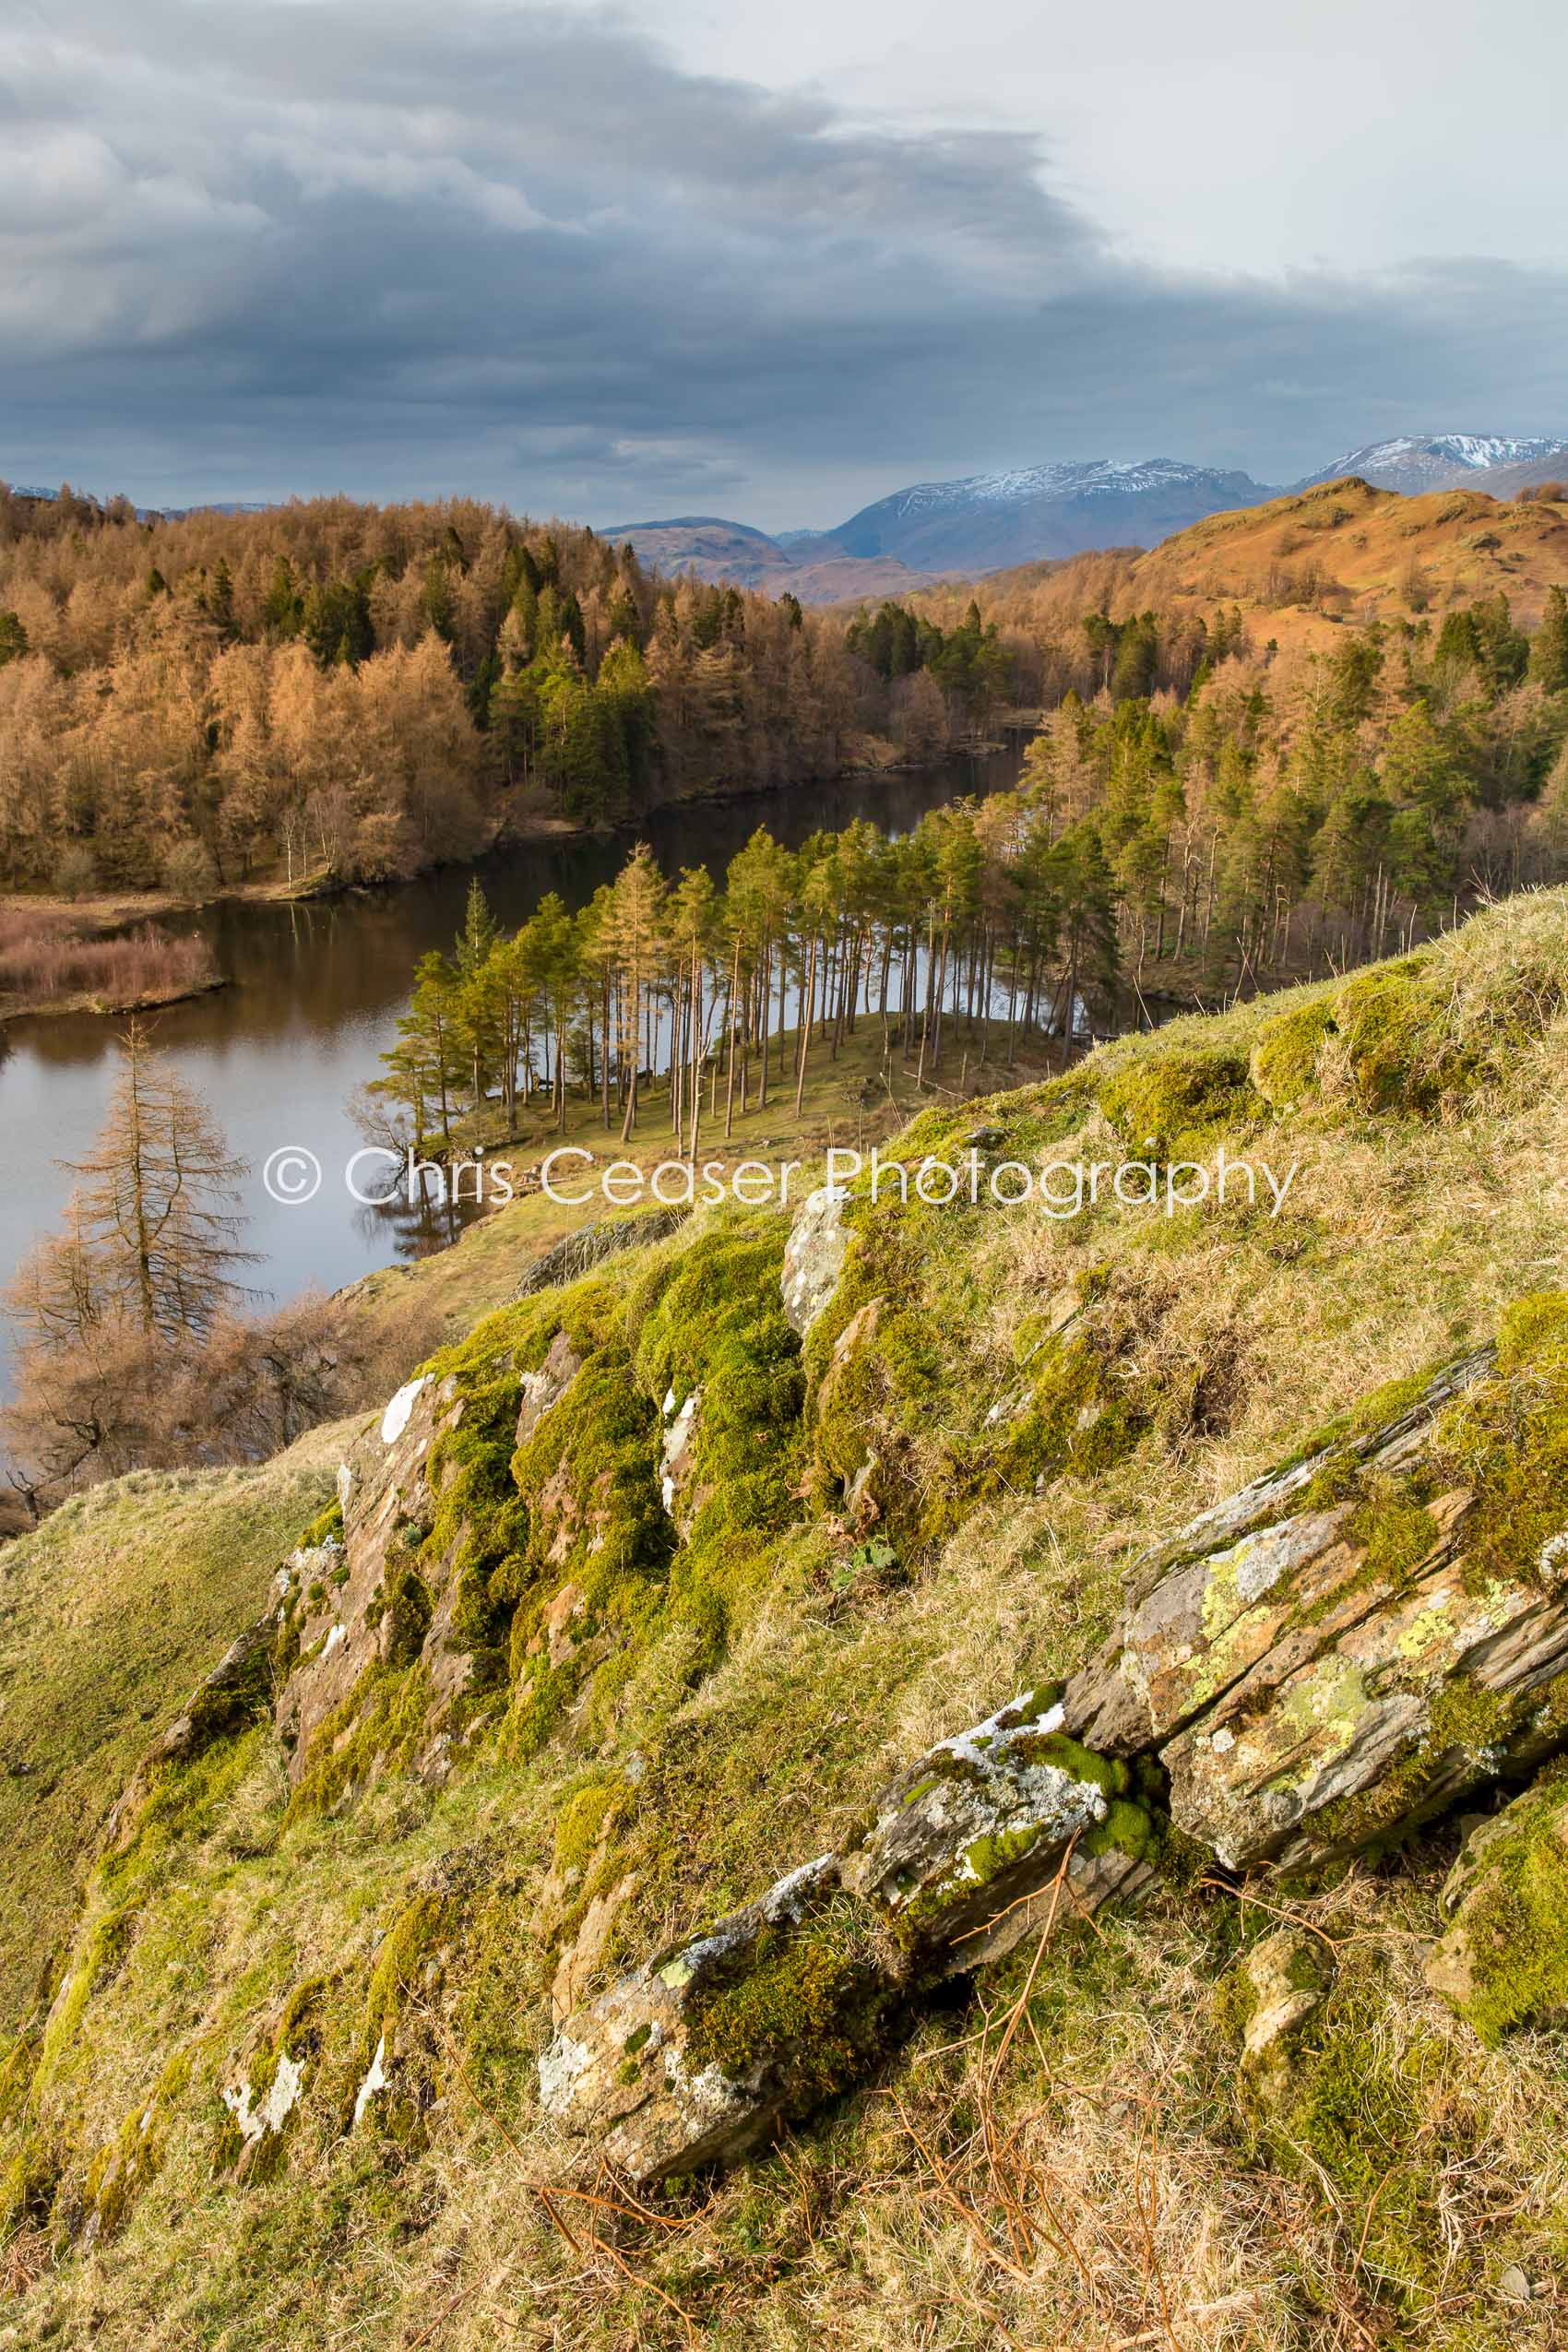 Over The Top, Tarn Hows